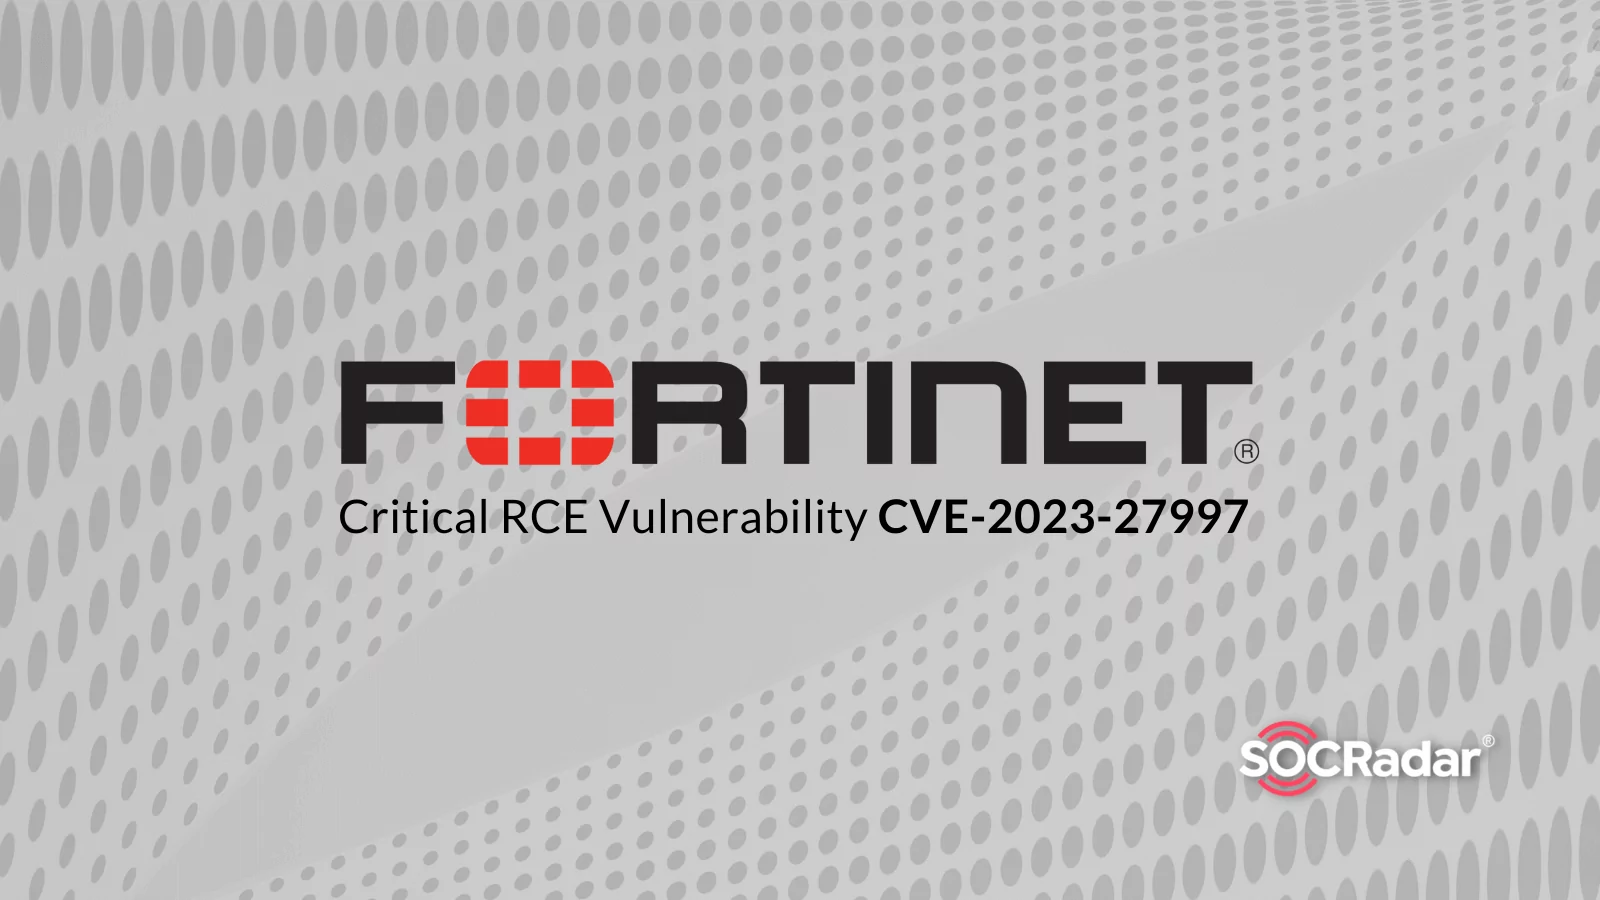 SOCRadar® Cyber Intelligence Inc. | Fortinet Rolls Out Patches for Critical RCE Vulnerability in SSL VPN Devices (CVE-2023-27997)